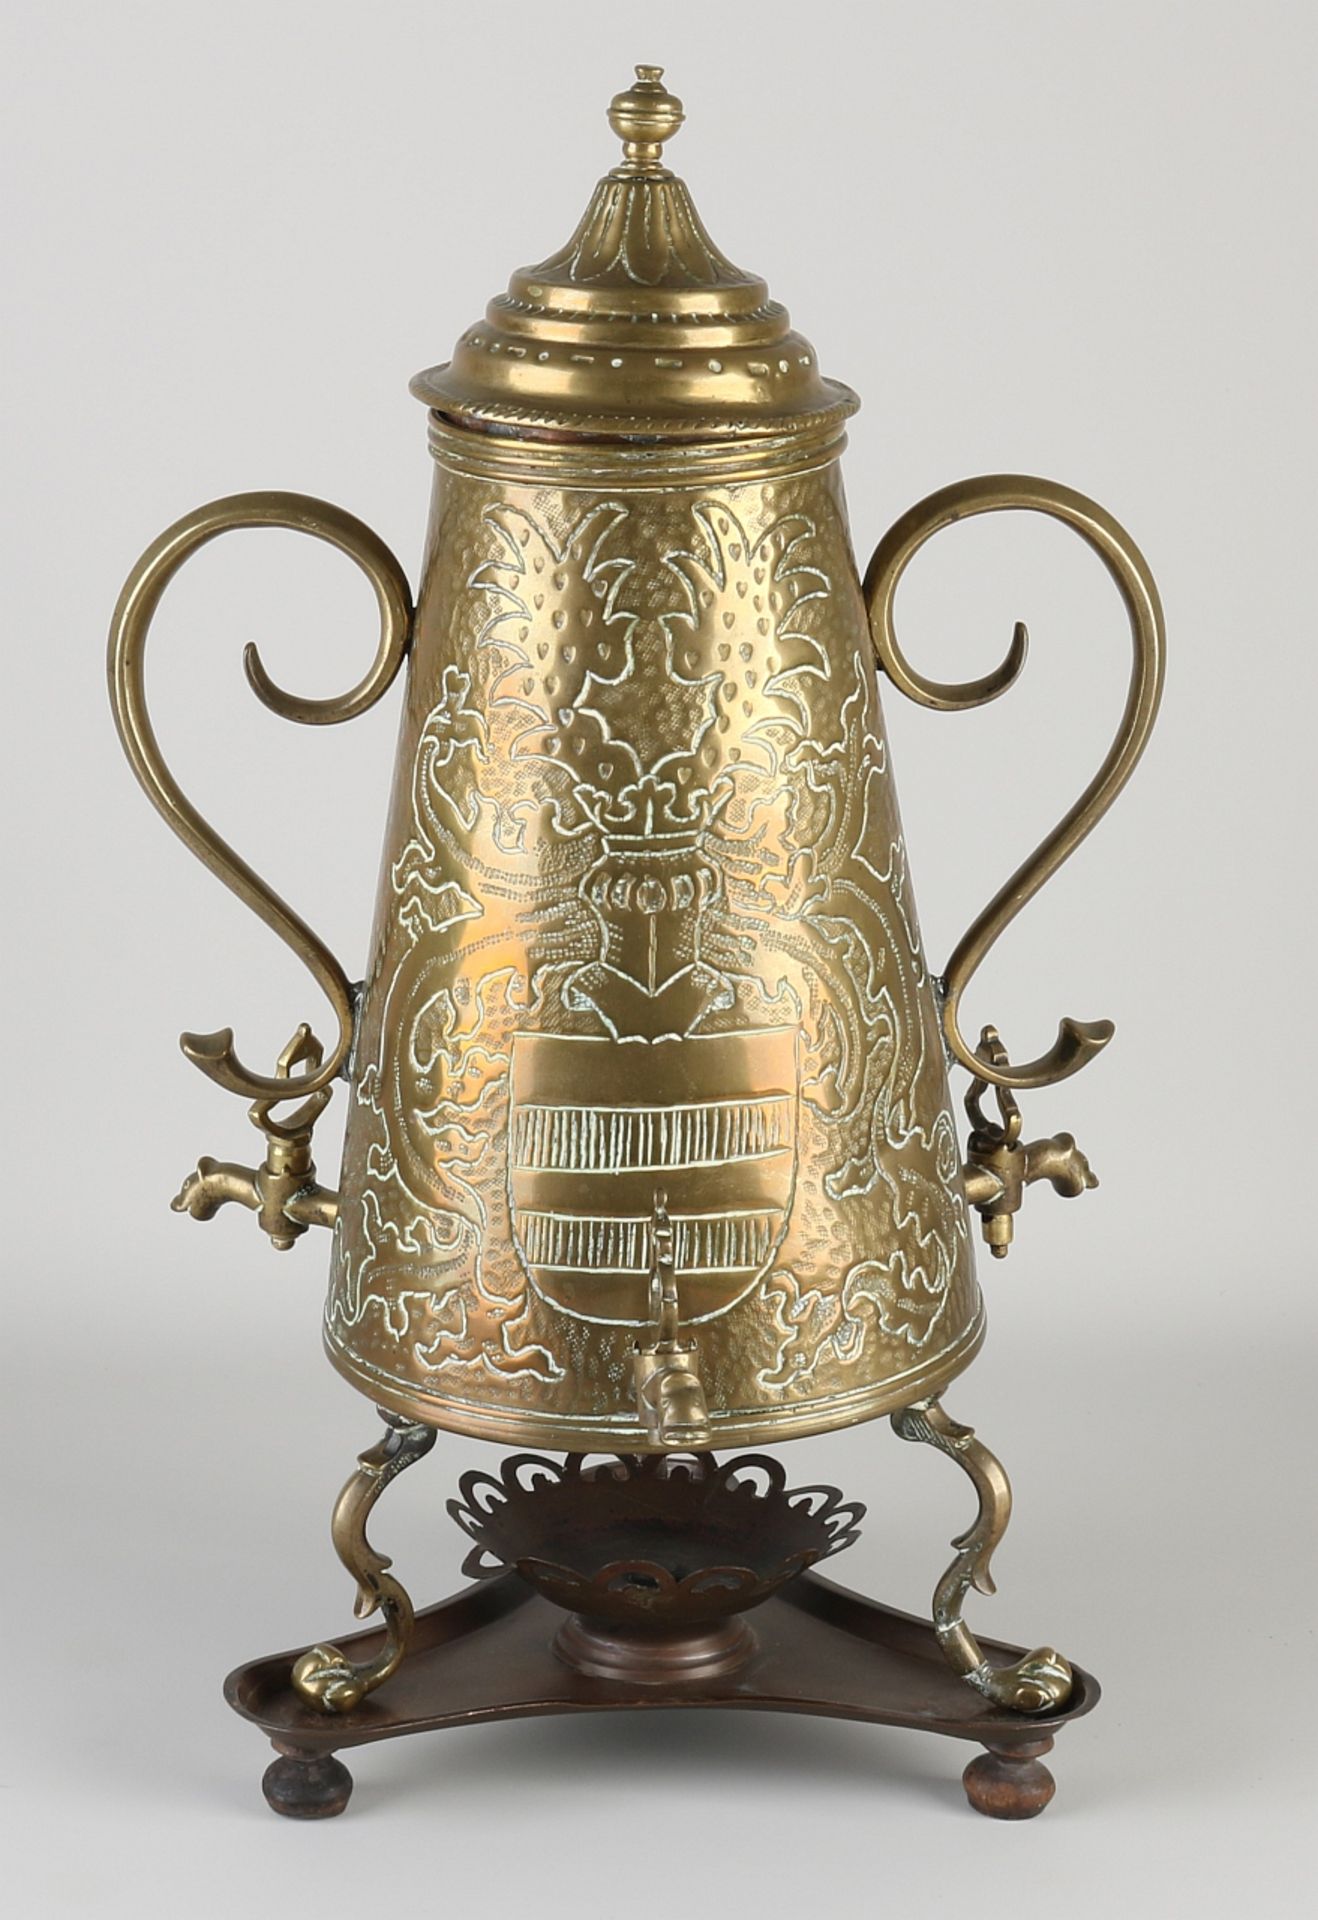 Amsterdam tap jug with city coat of arms